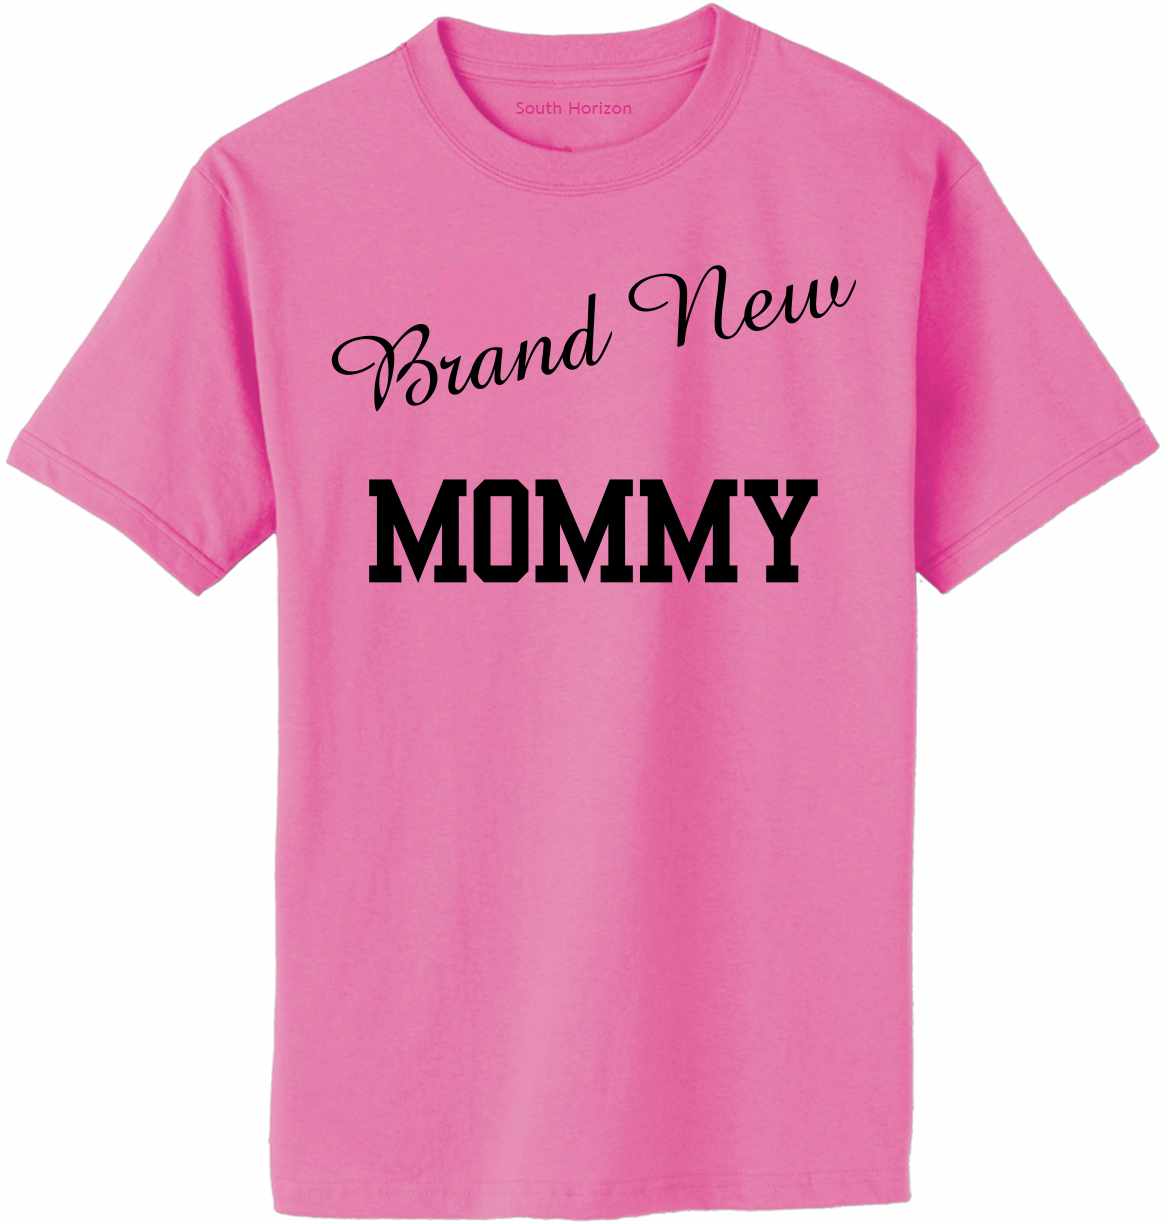 Brand New Mommy Adult T-Shirt (#1020-1)